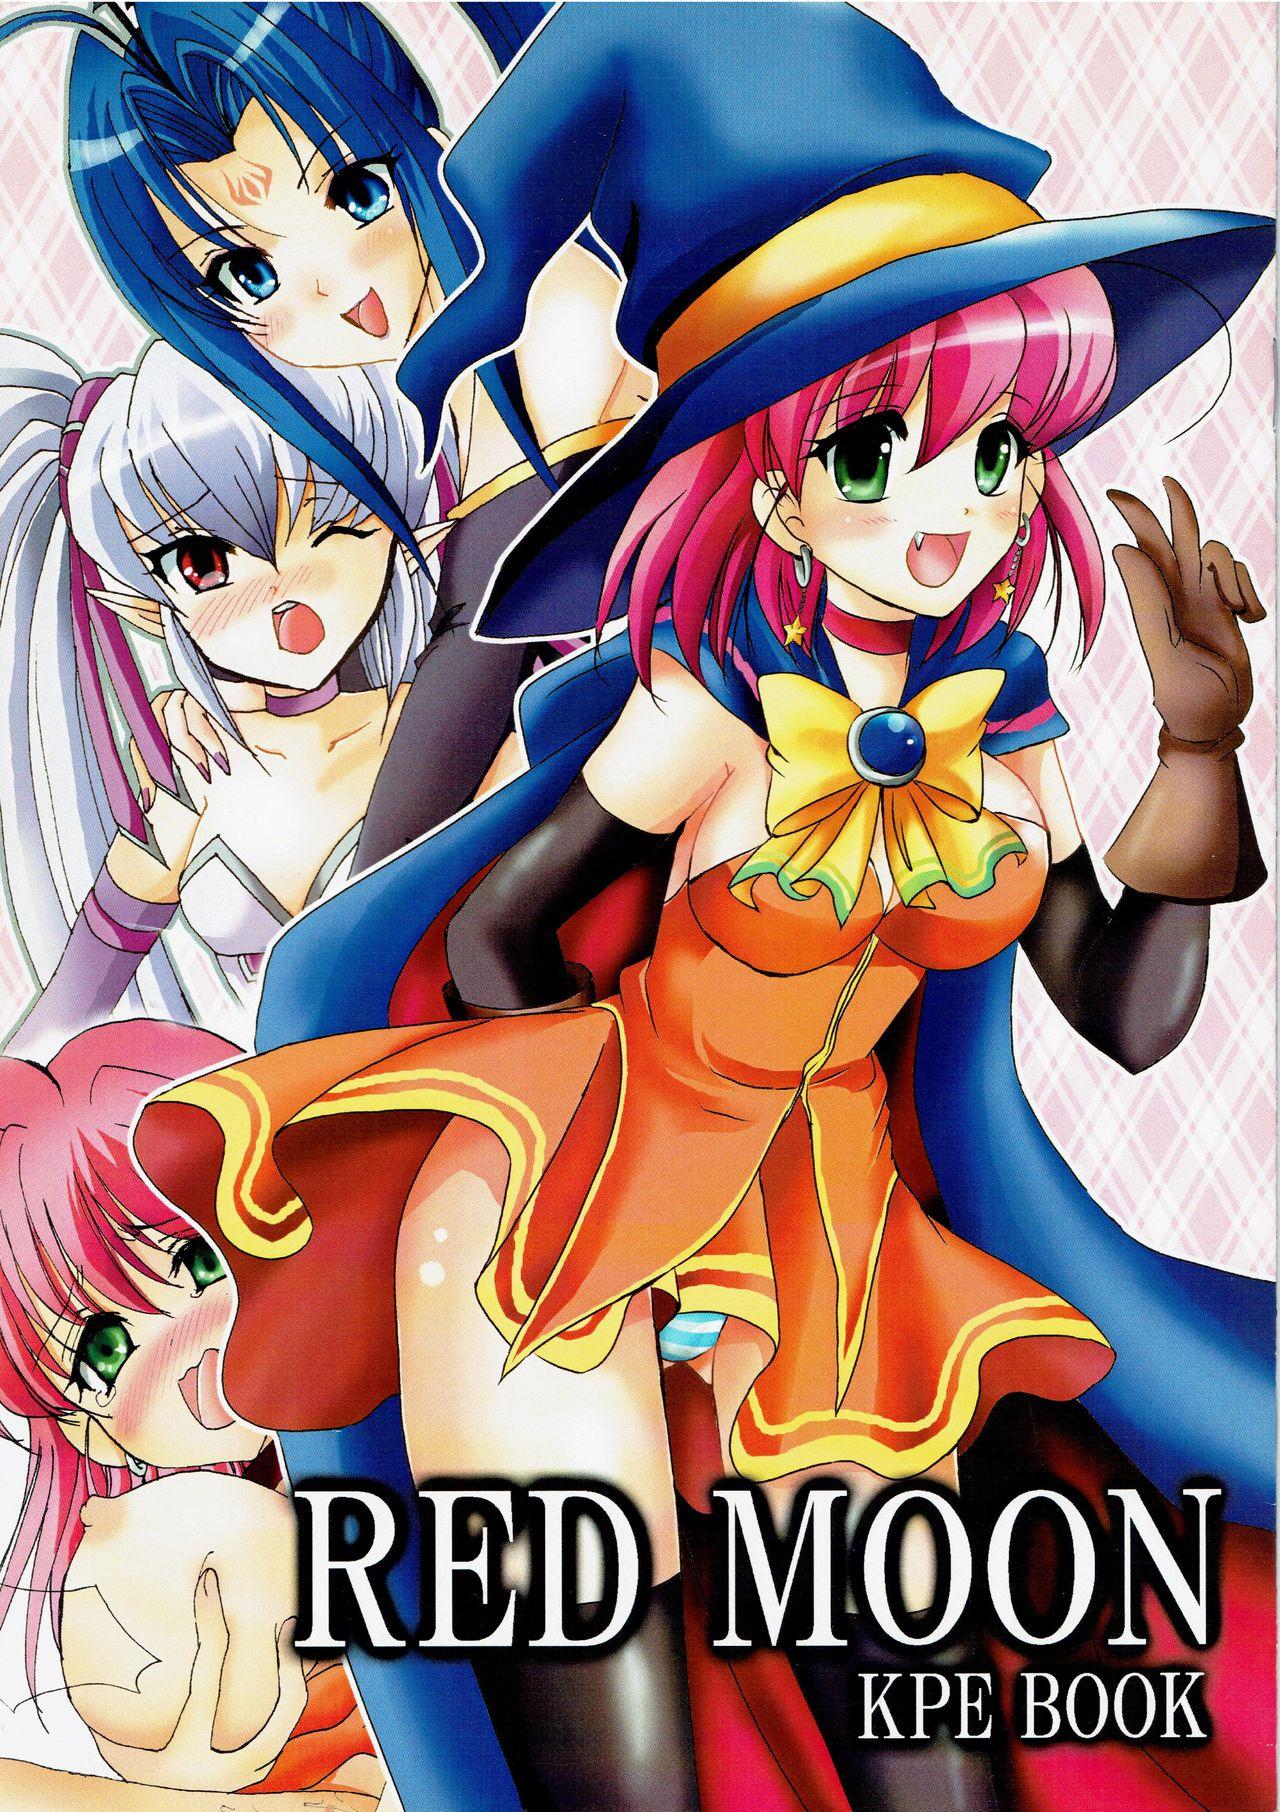 Animation RED MOON - Magical halloween Castlevania Bangbros - Page 1